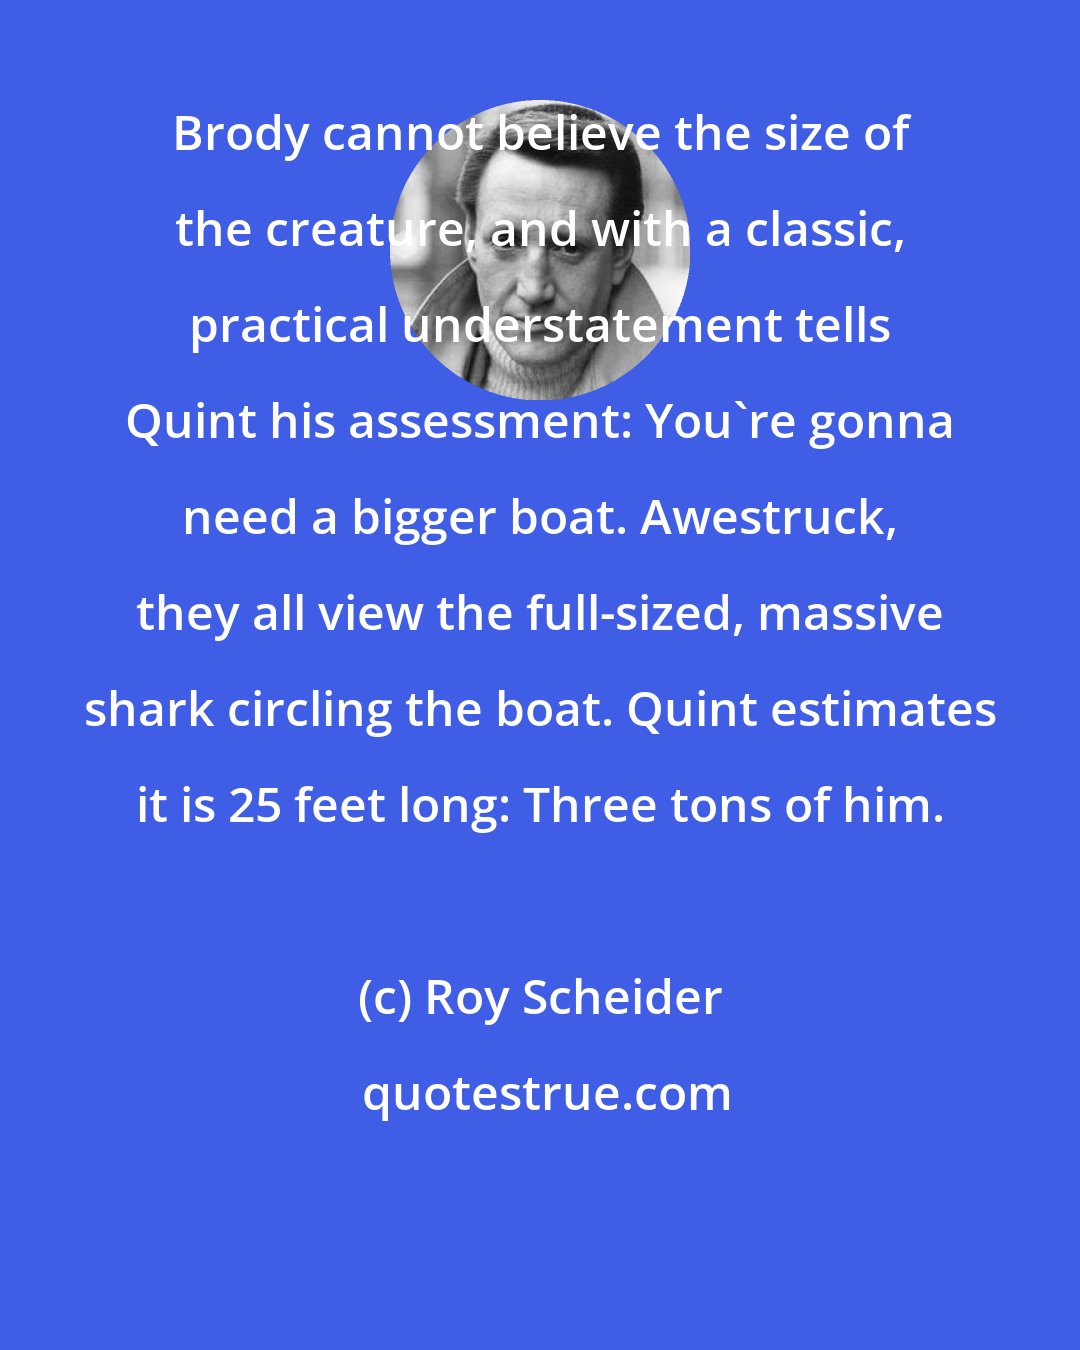 Roy Scheider: Brody cannot believe the size of the creature, and with a classic, practical understatement tells Quint his assessment: You're gonna need a bigger boat. Awestruck, they all view the full-sized, massive shark circling the boat. Quint estimates it is 25 feet long: Three tons of him.